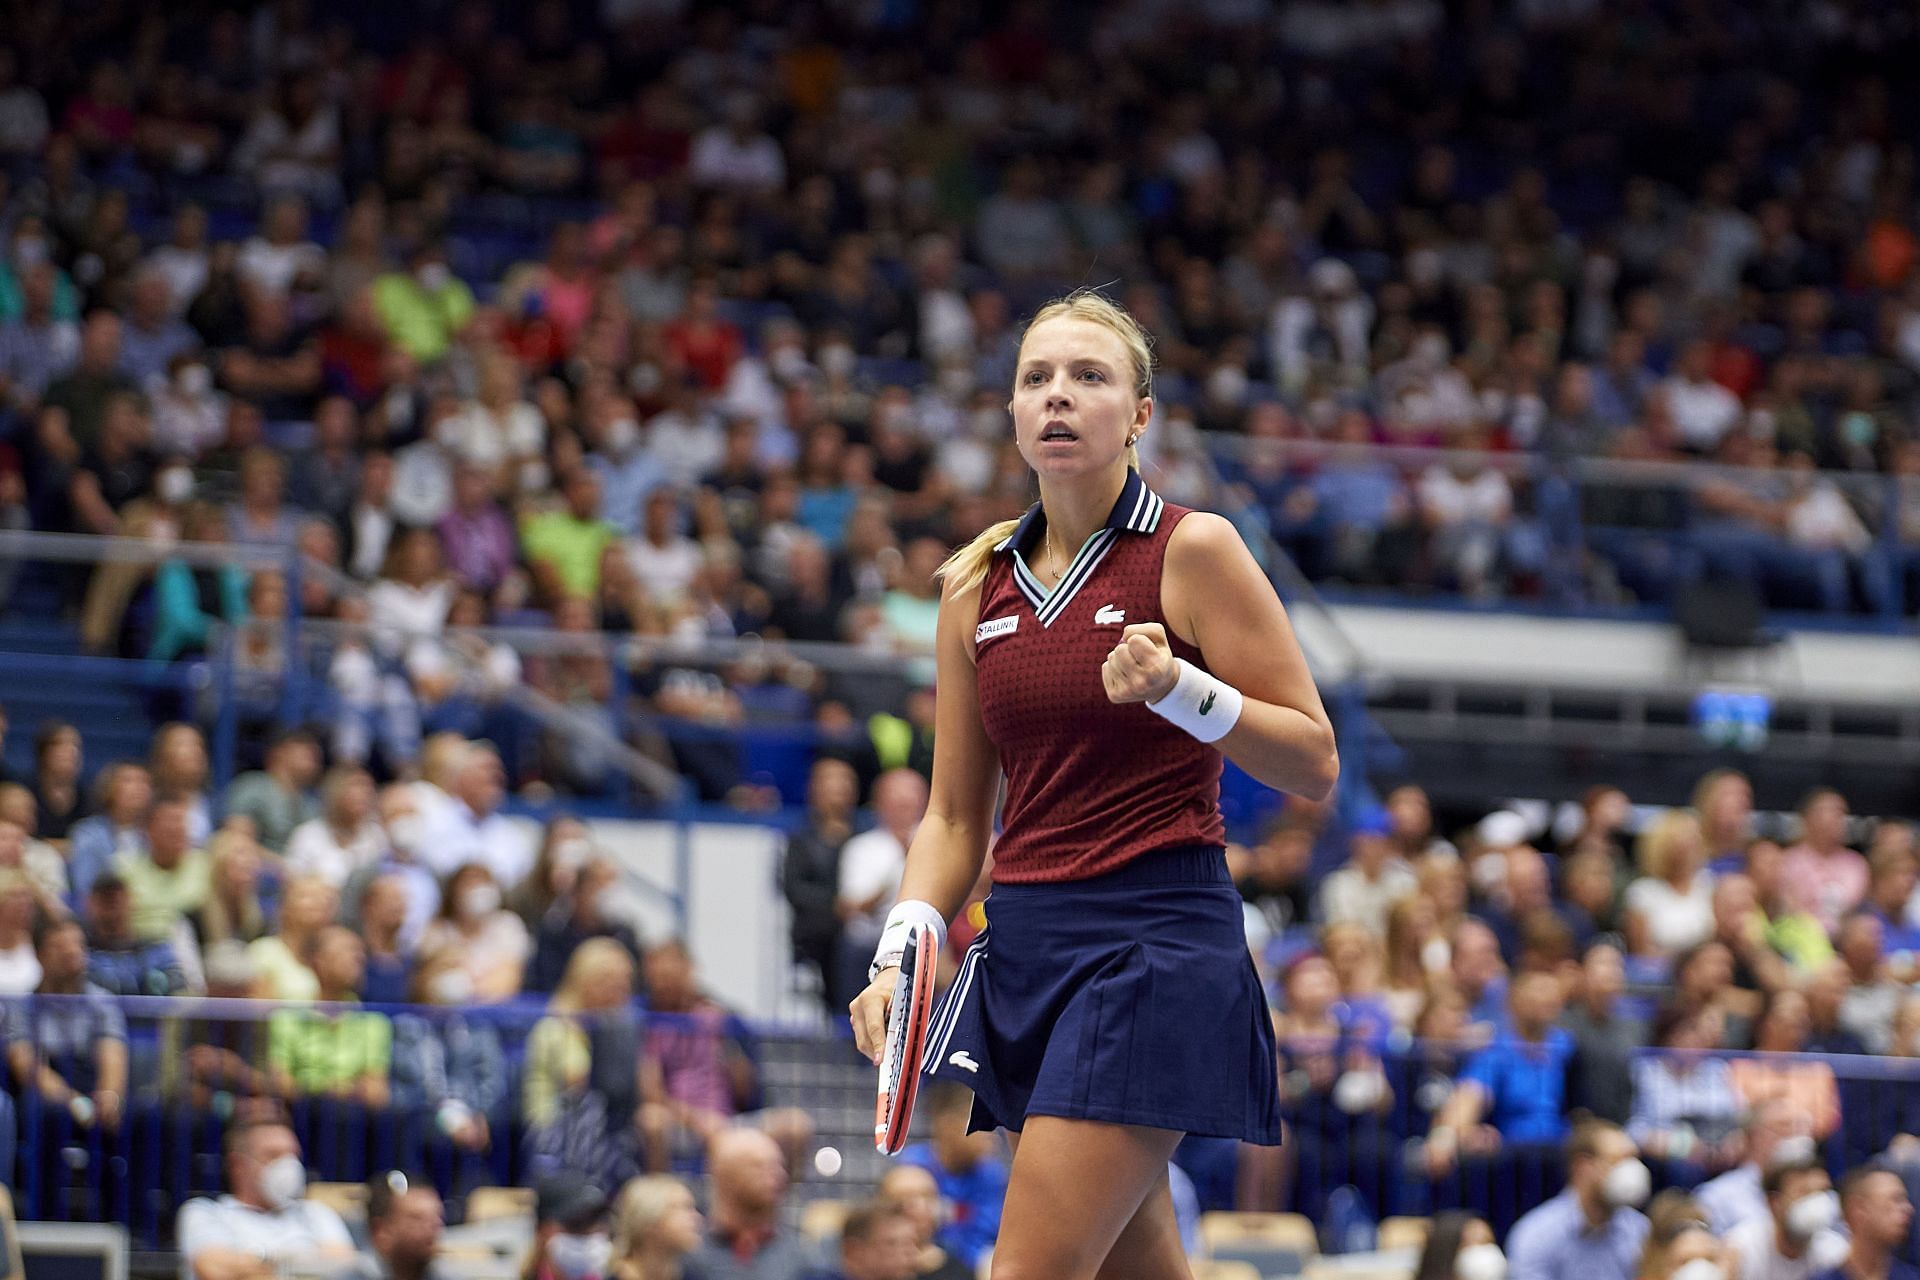 Kontaveit will be looking to open her title defense on a solid note.